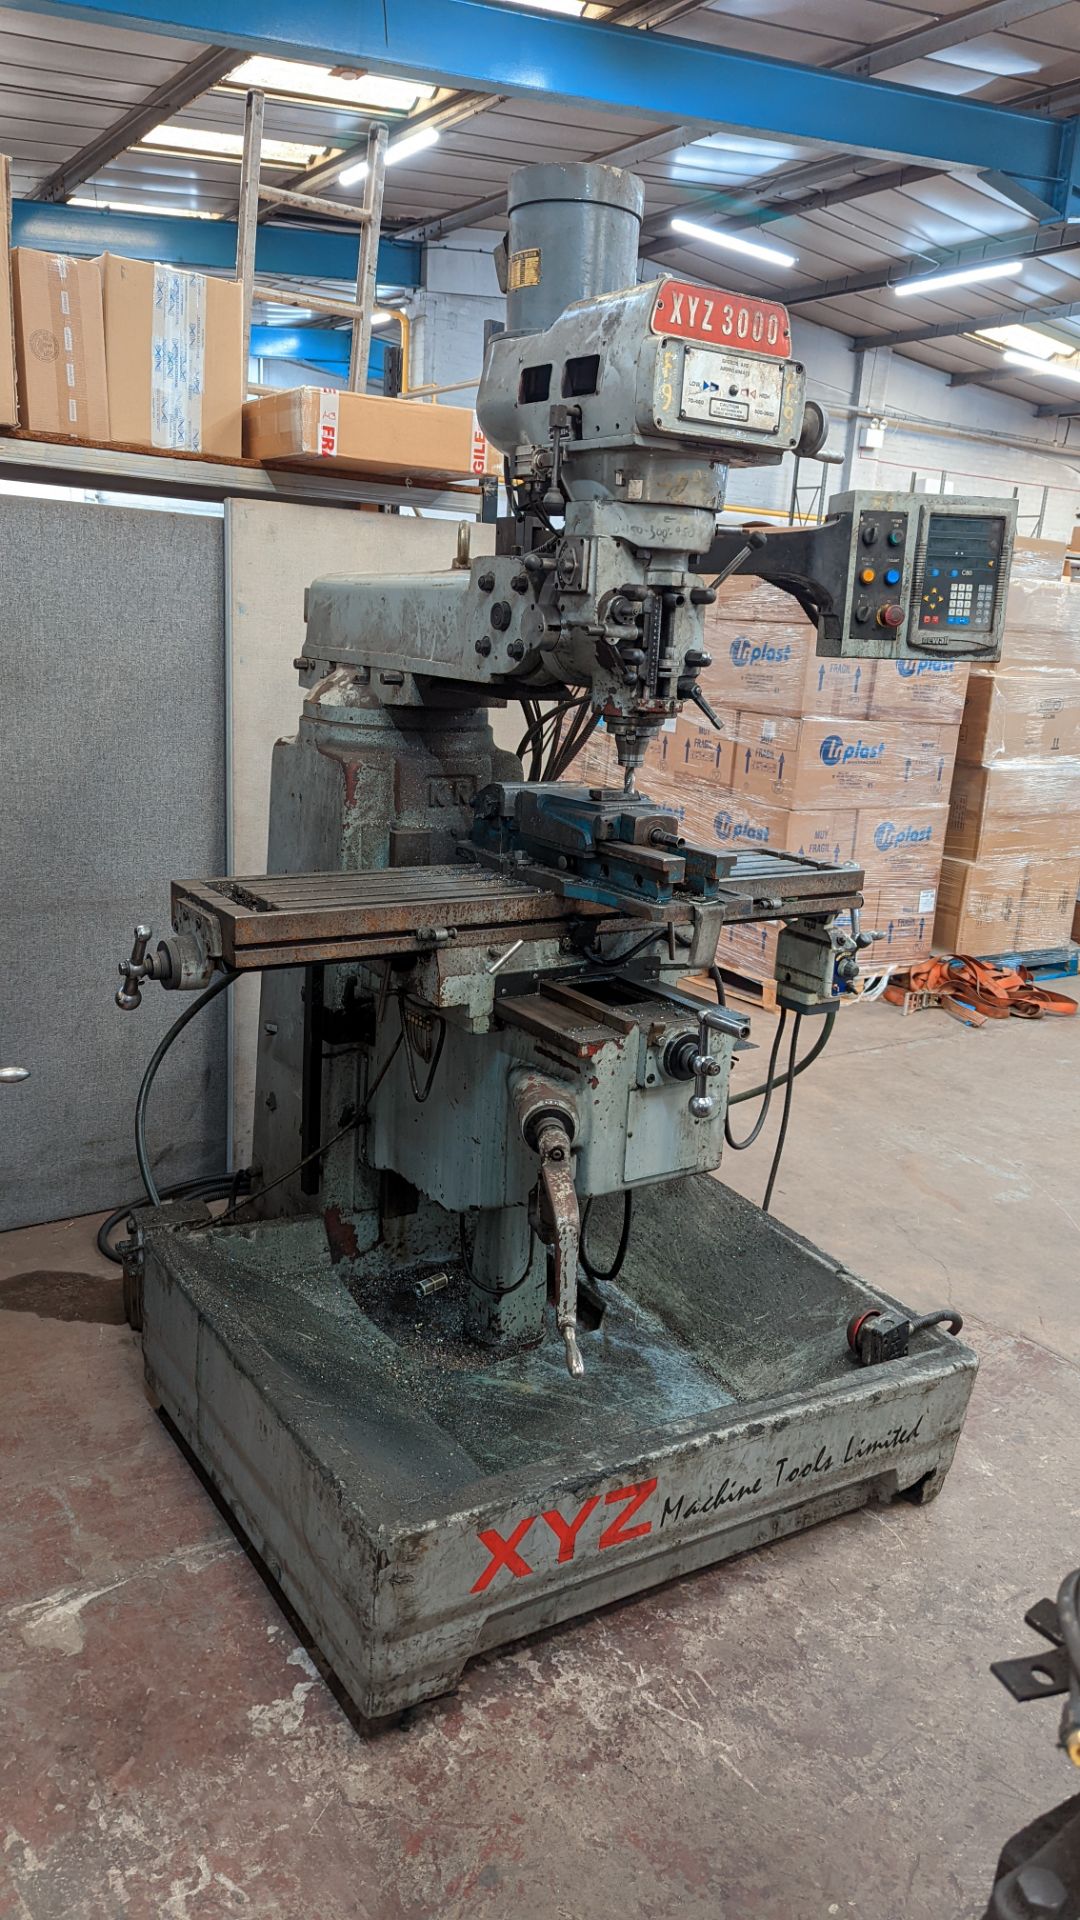 XYZ 3000 KR-V3000 turret mill with Newell DRO & Align CE-500S power feed - Image 5 of 16